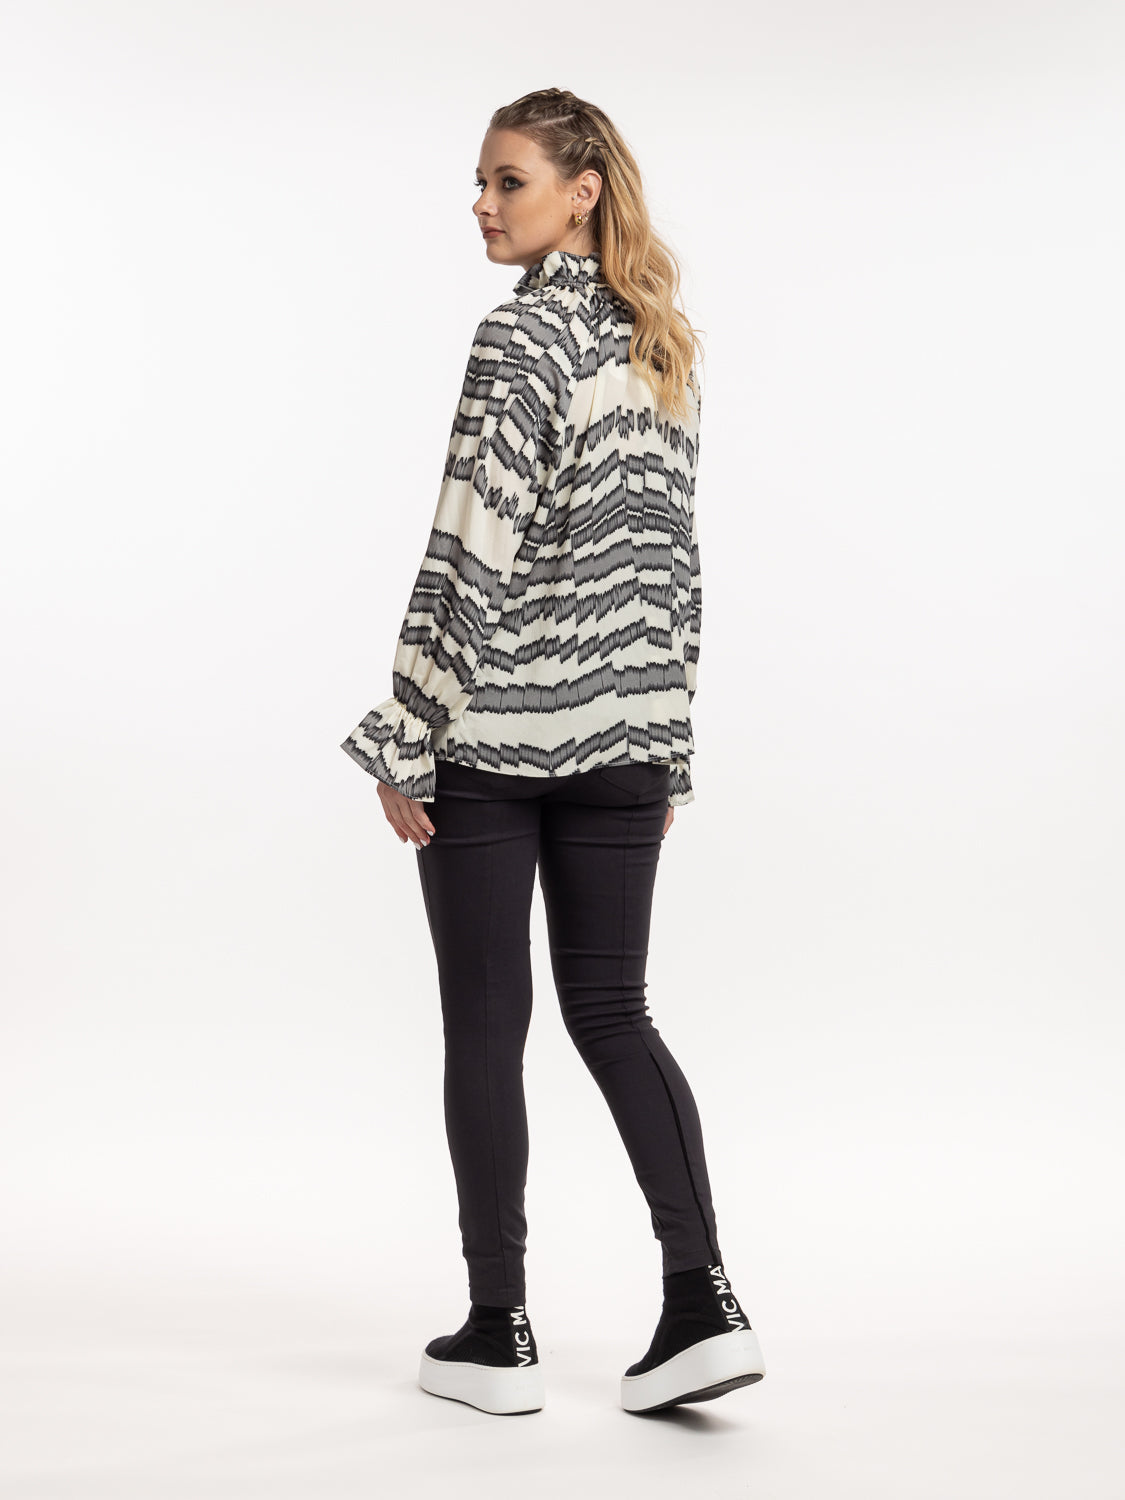 STYLE X LAB ARTIC TOP - PRINT - THE VOGUE STORE